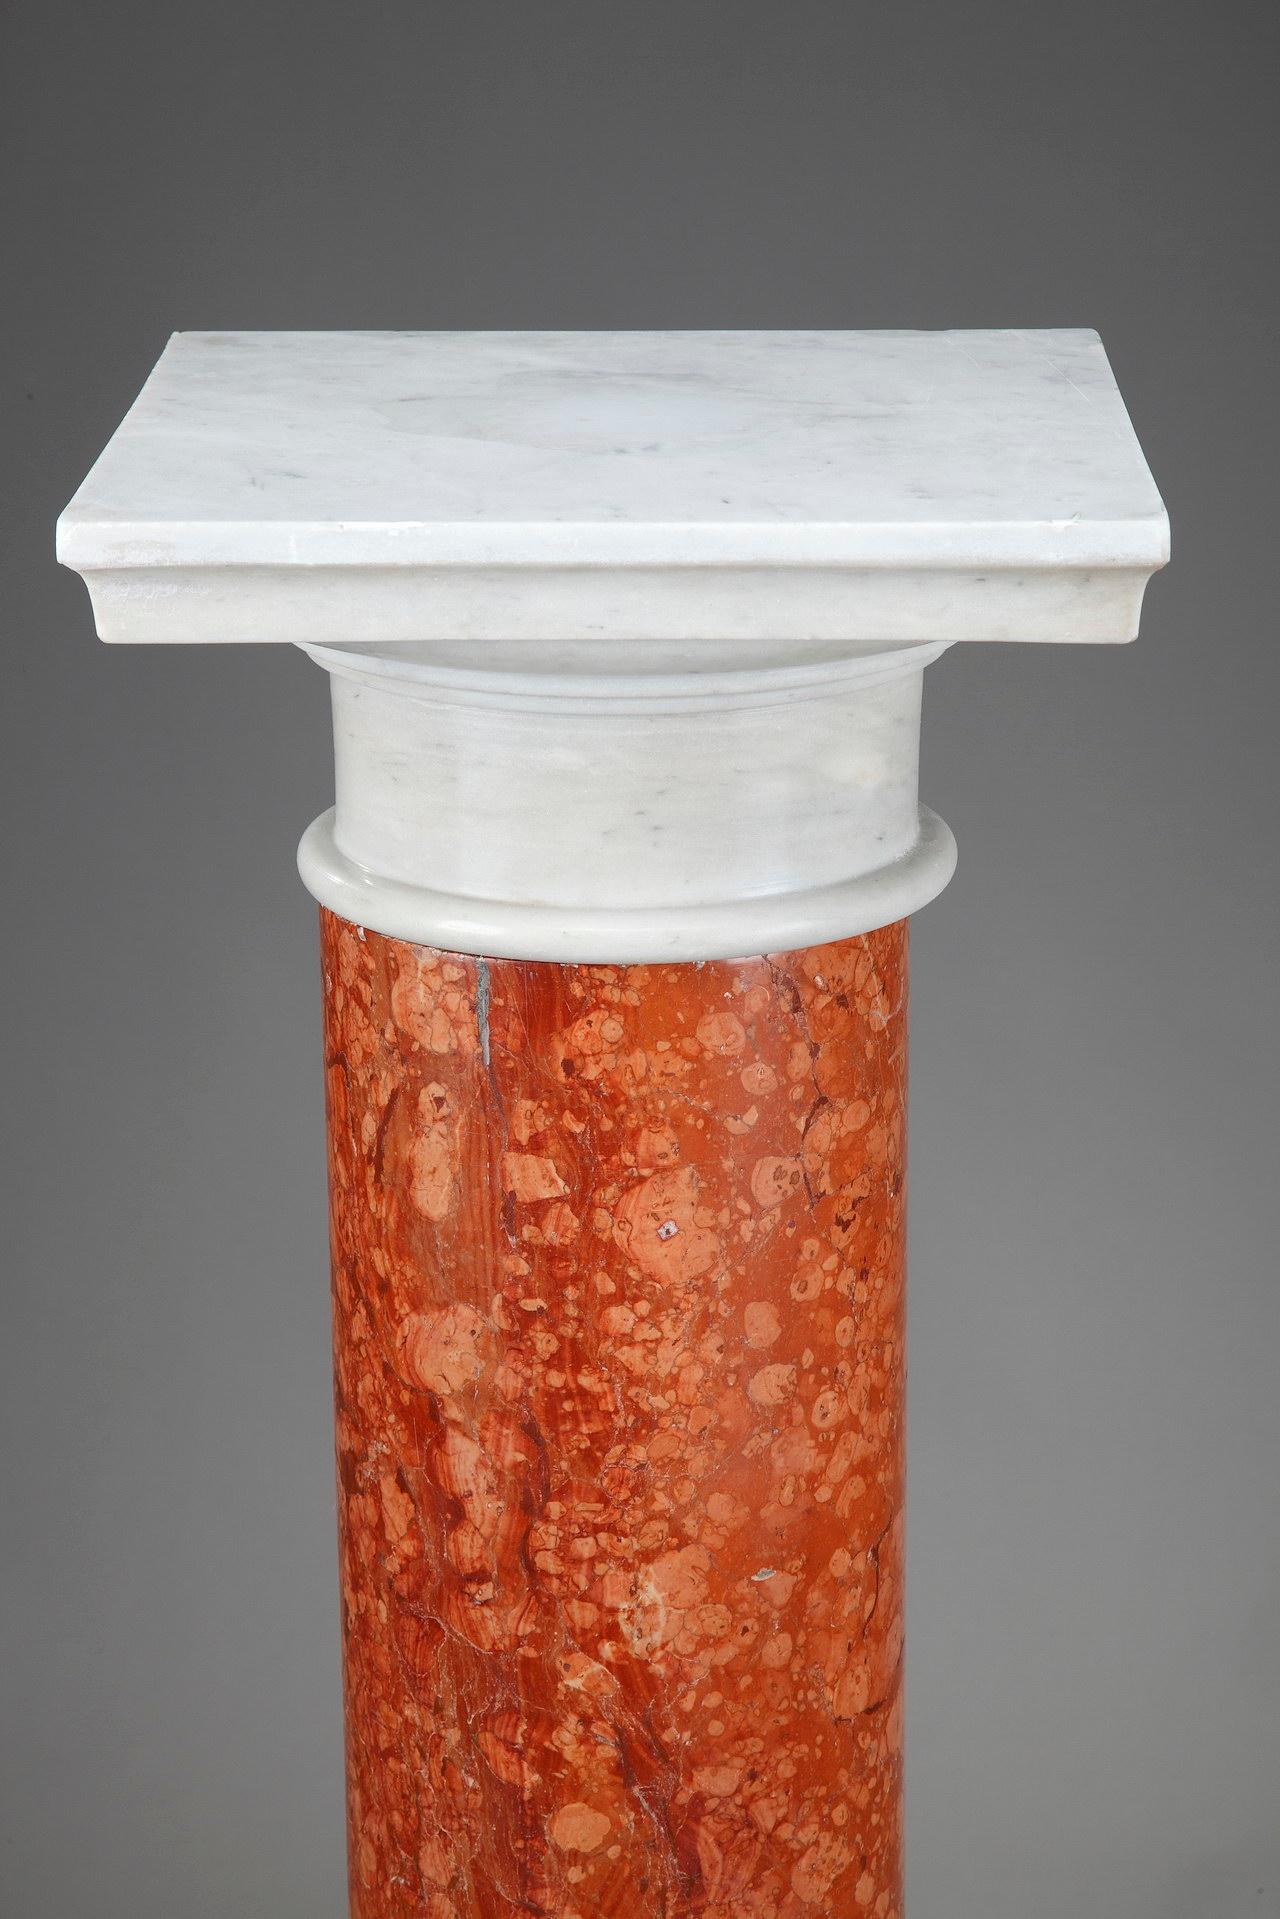 Pair of Doric columns elegantly crafted of red Italian Verona marble, with capital, plate and base in white marble. The Red Verona Marble (Rosso Verona Marmo) is a variety of limestone rock which takes its name from Verona in Northern Italy. Its